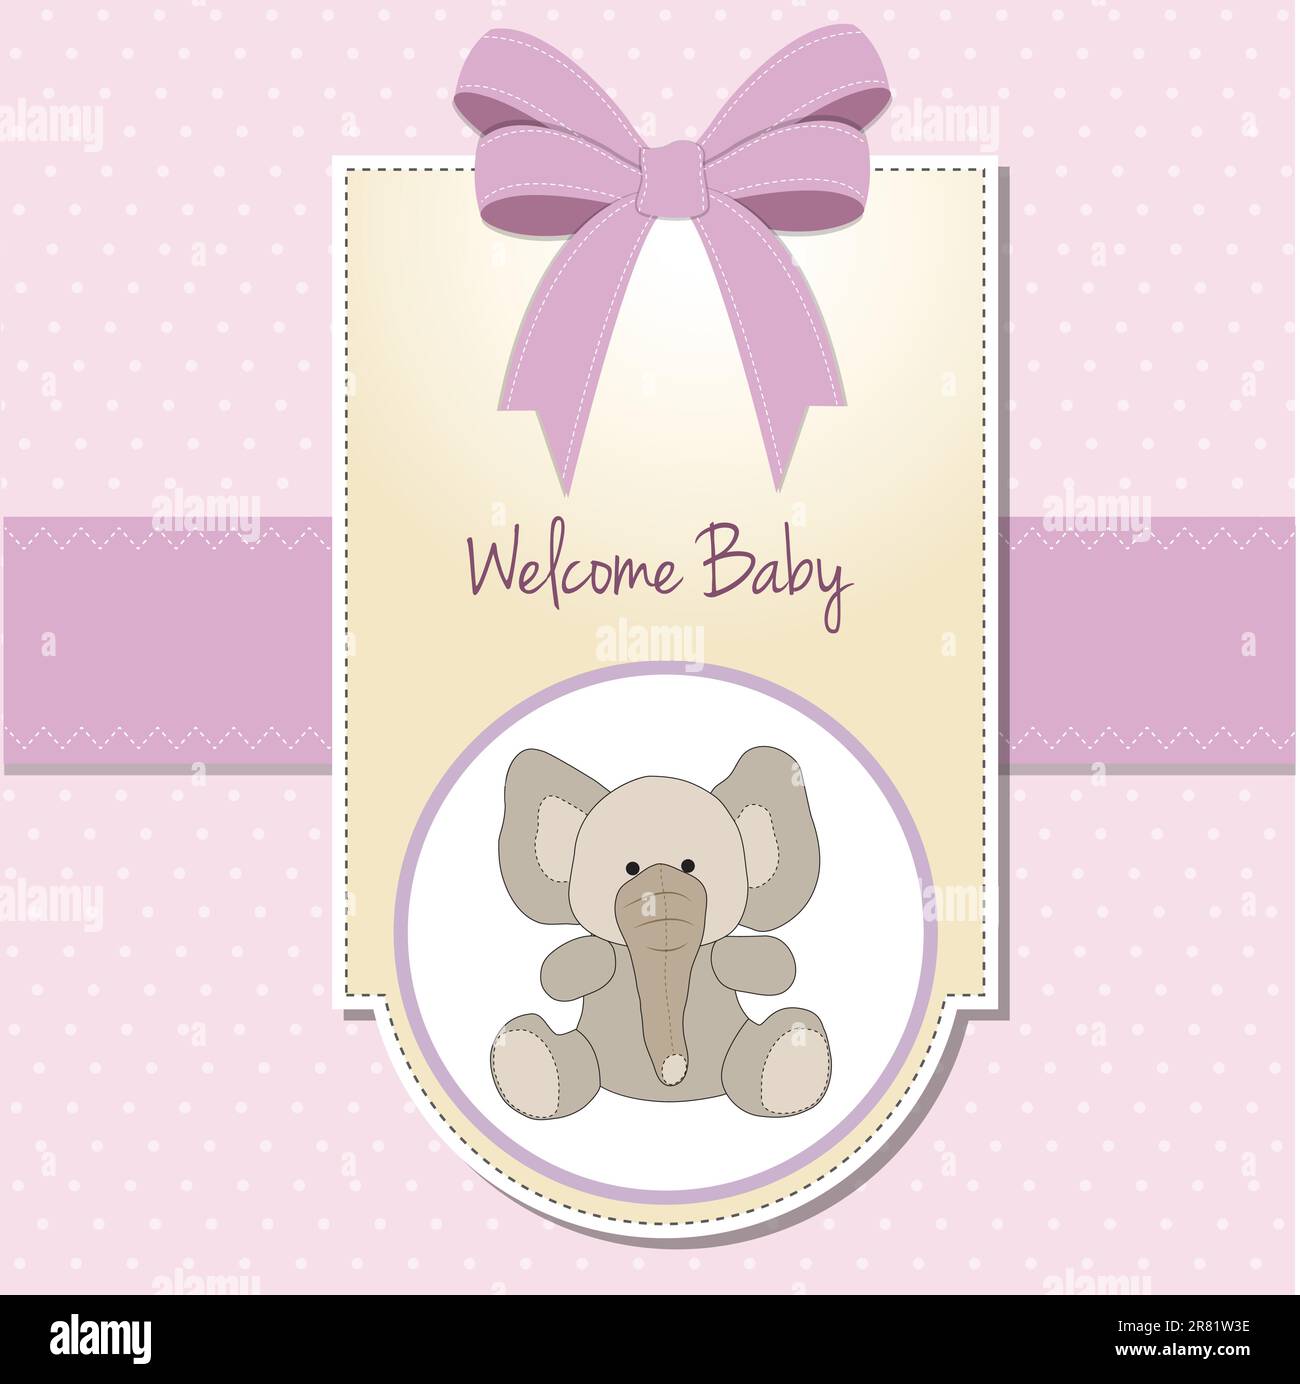 new baby card with elephant Stock Vector